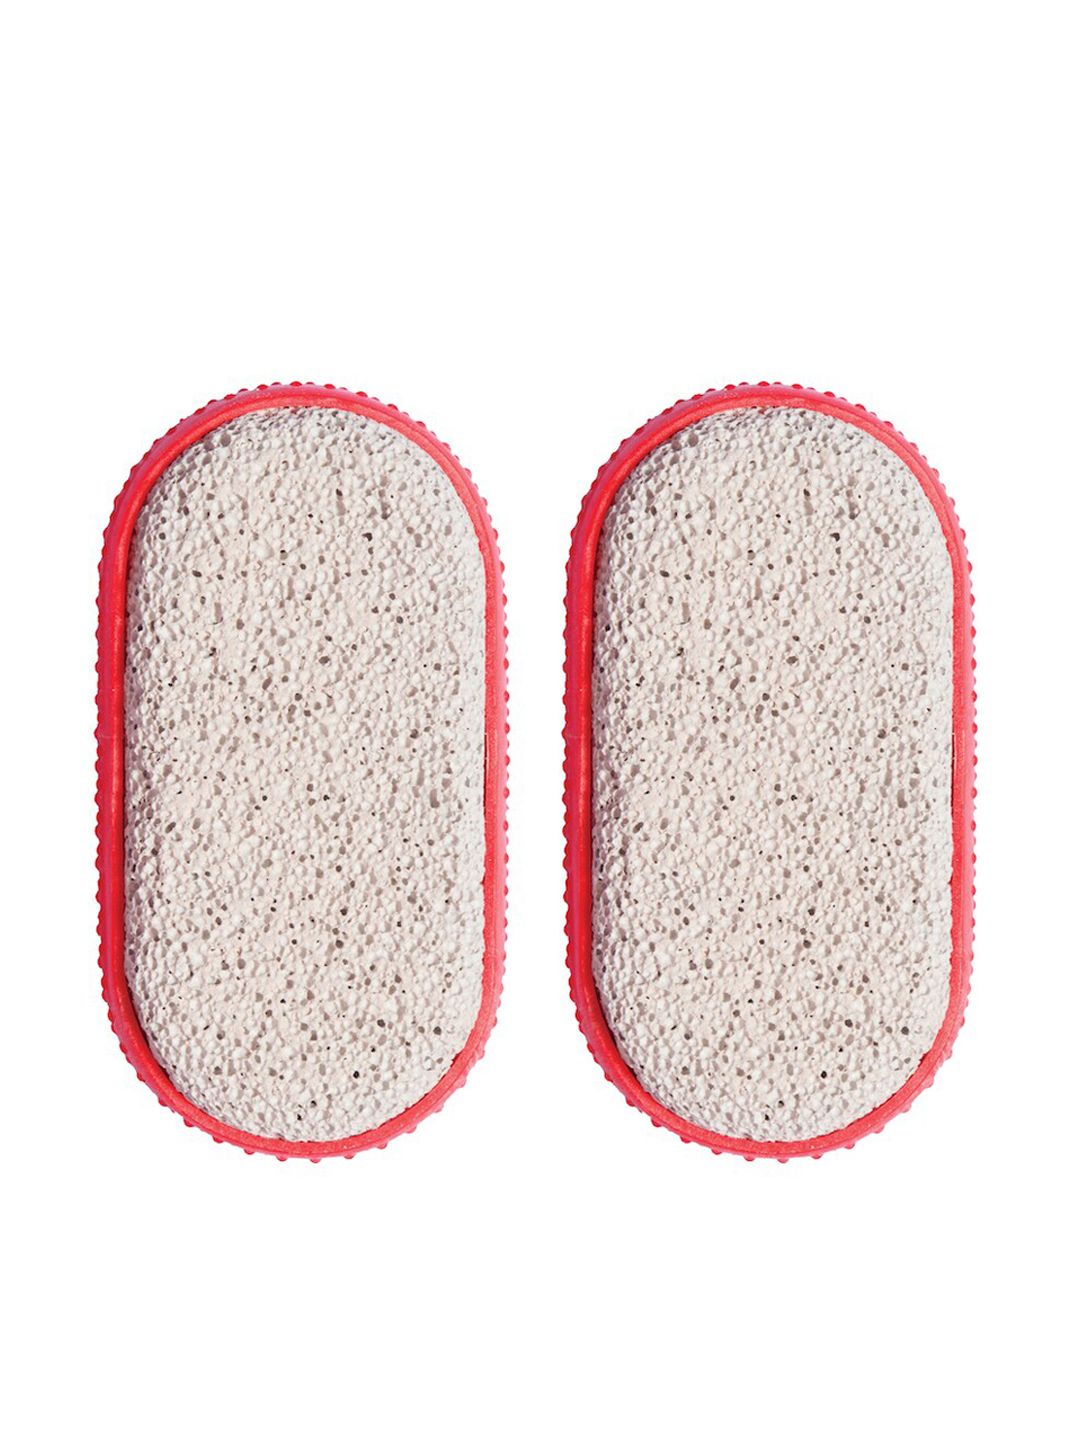 GUBB Pack of 2 Red Pumice Stone Foot Cleaner with Grip Price in India